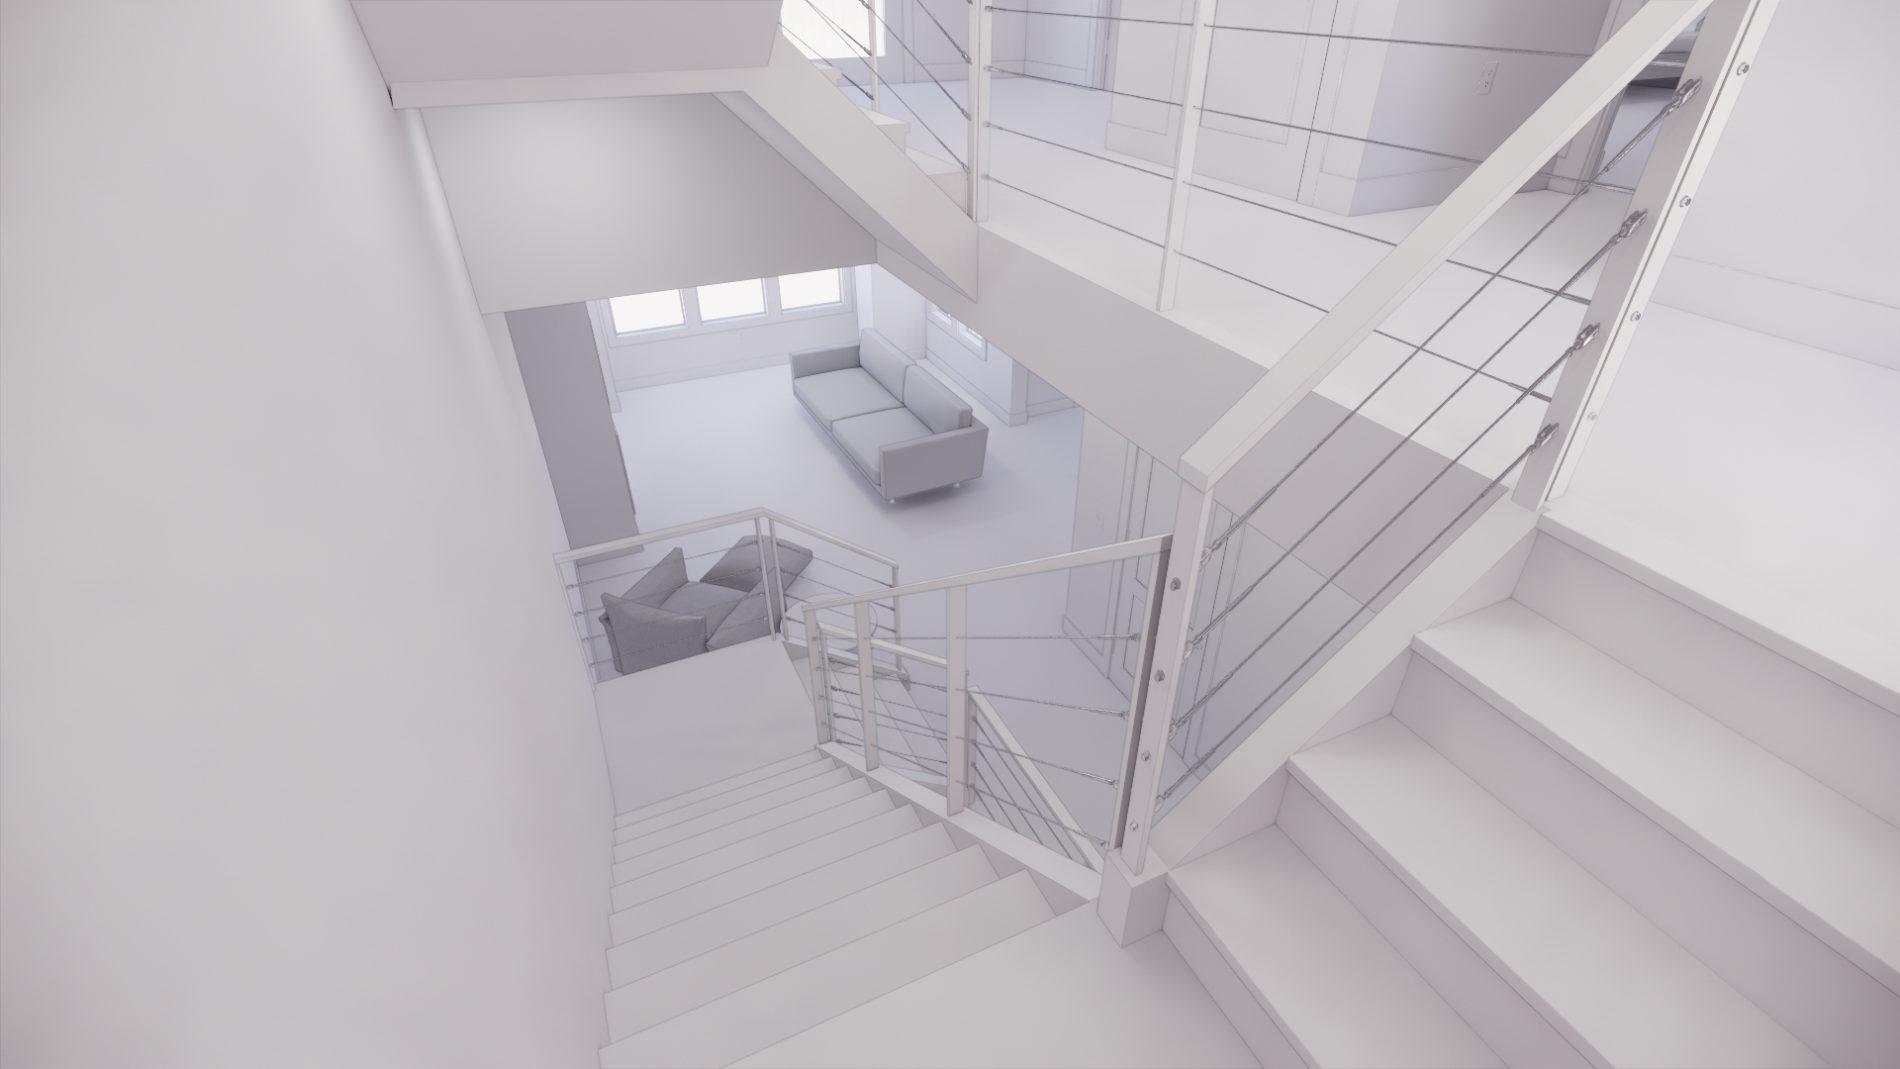 Architectural rendering of home stairway 3D design model